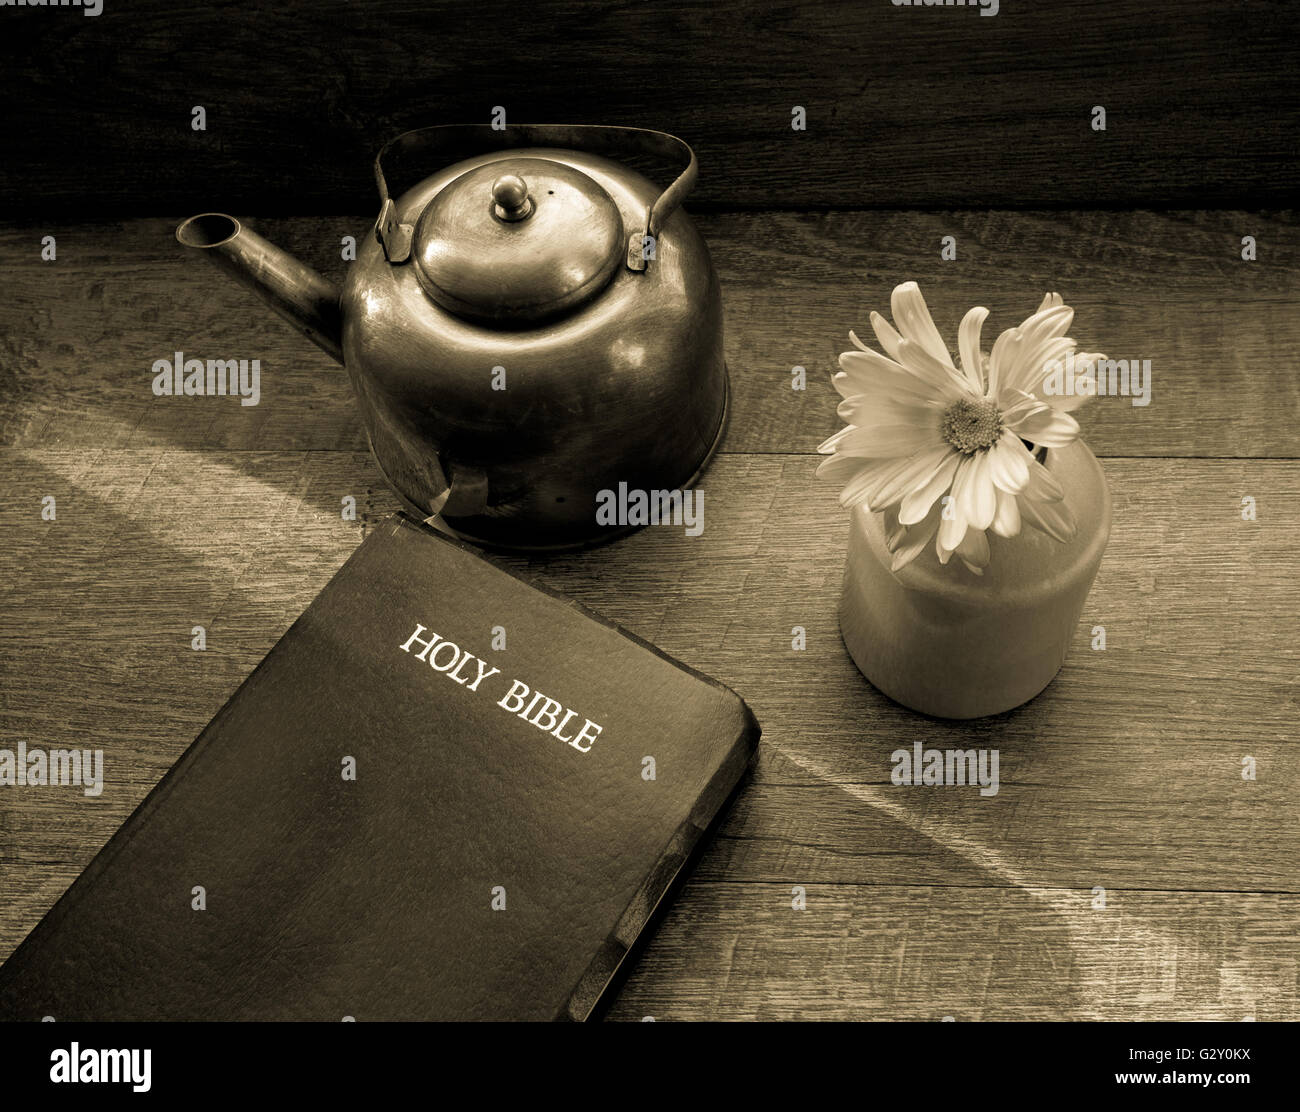 Morning Light Shines Across The King James Bible. Morning light illuminates a bible with a copper teapot and fresh flower. Shot Stock Photo